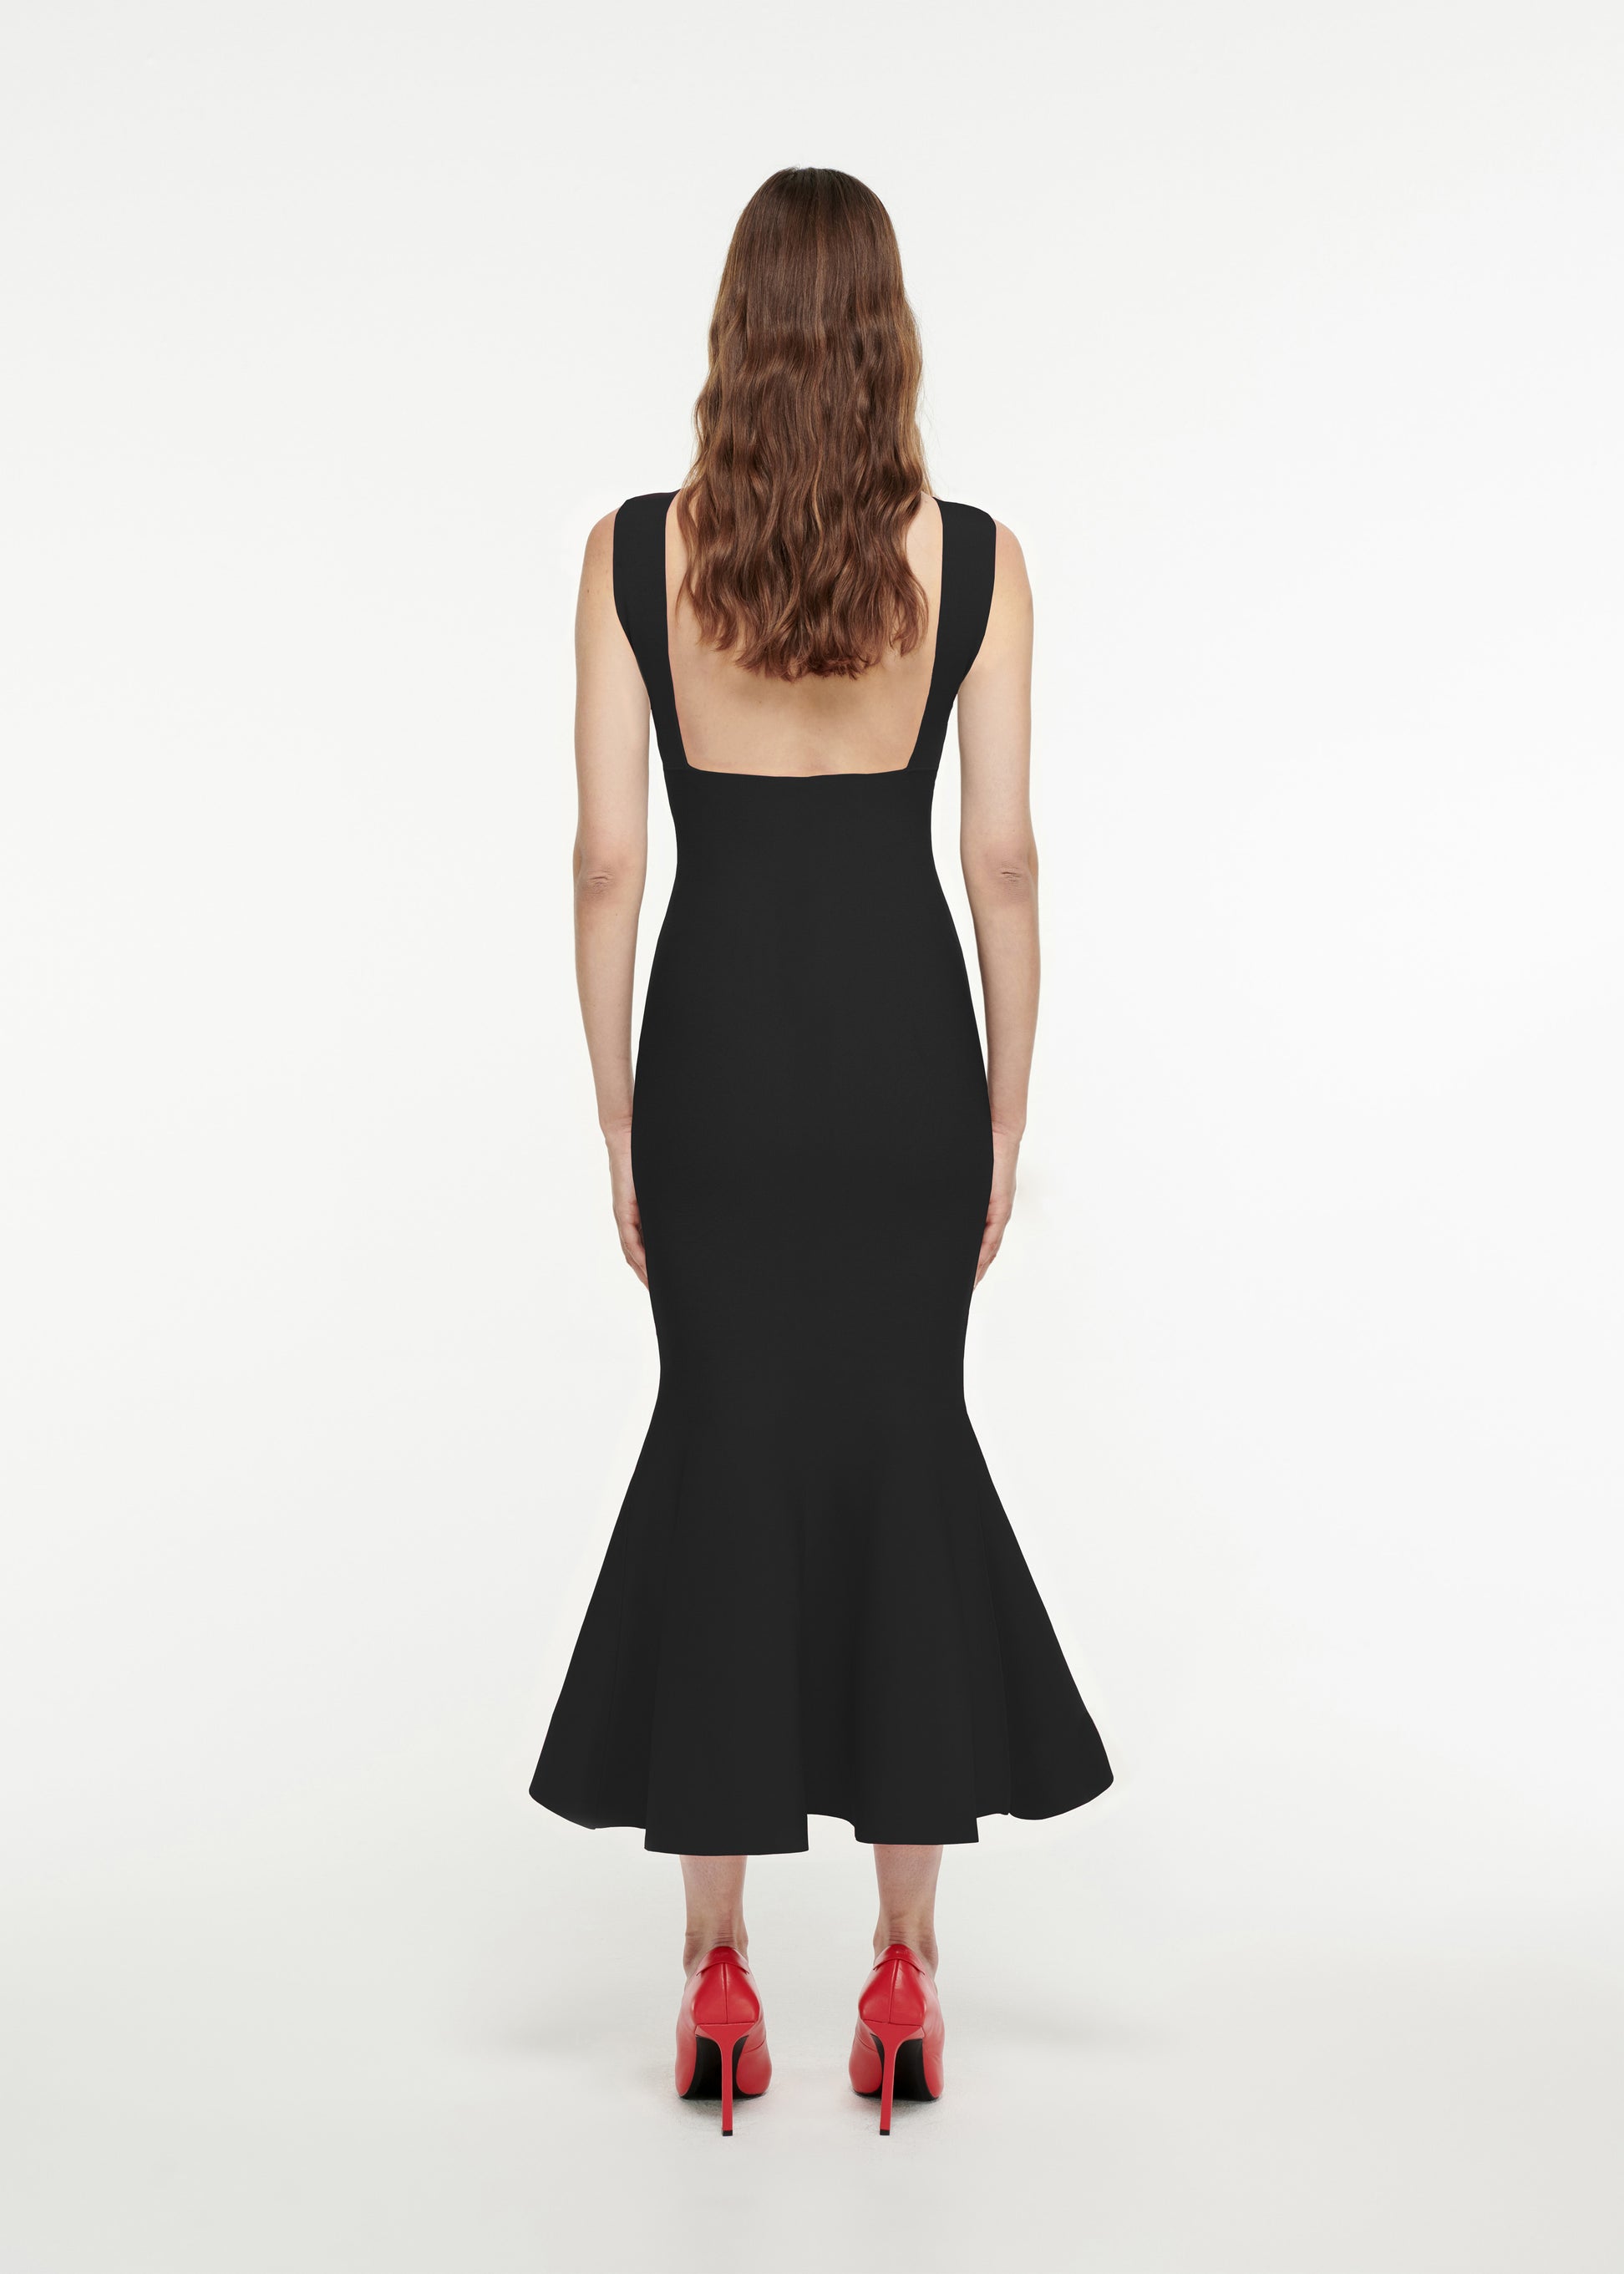 The back of a woman wearing the Knit Midi Dress in Black